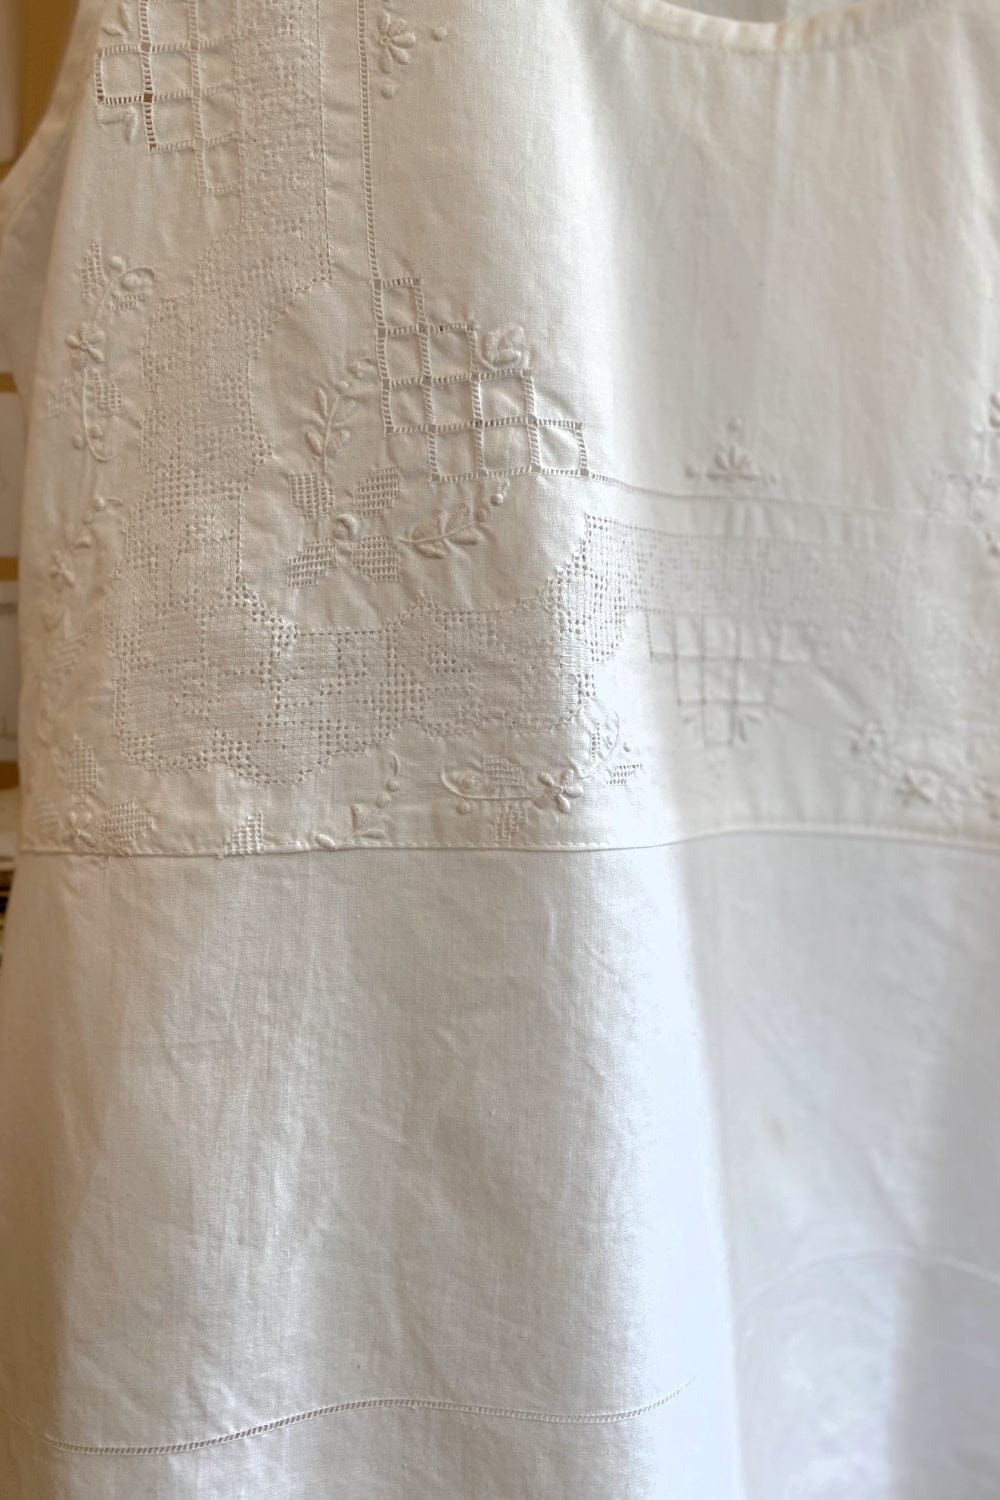 Close up of stitching detail on white vintage tablecloth tank.